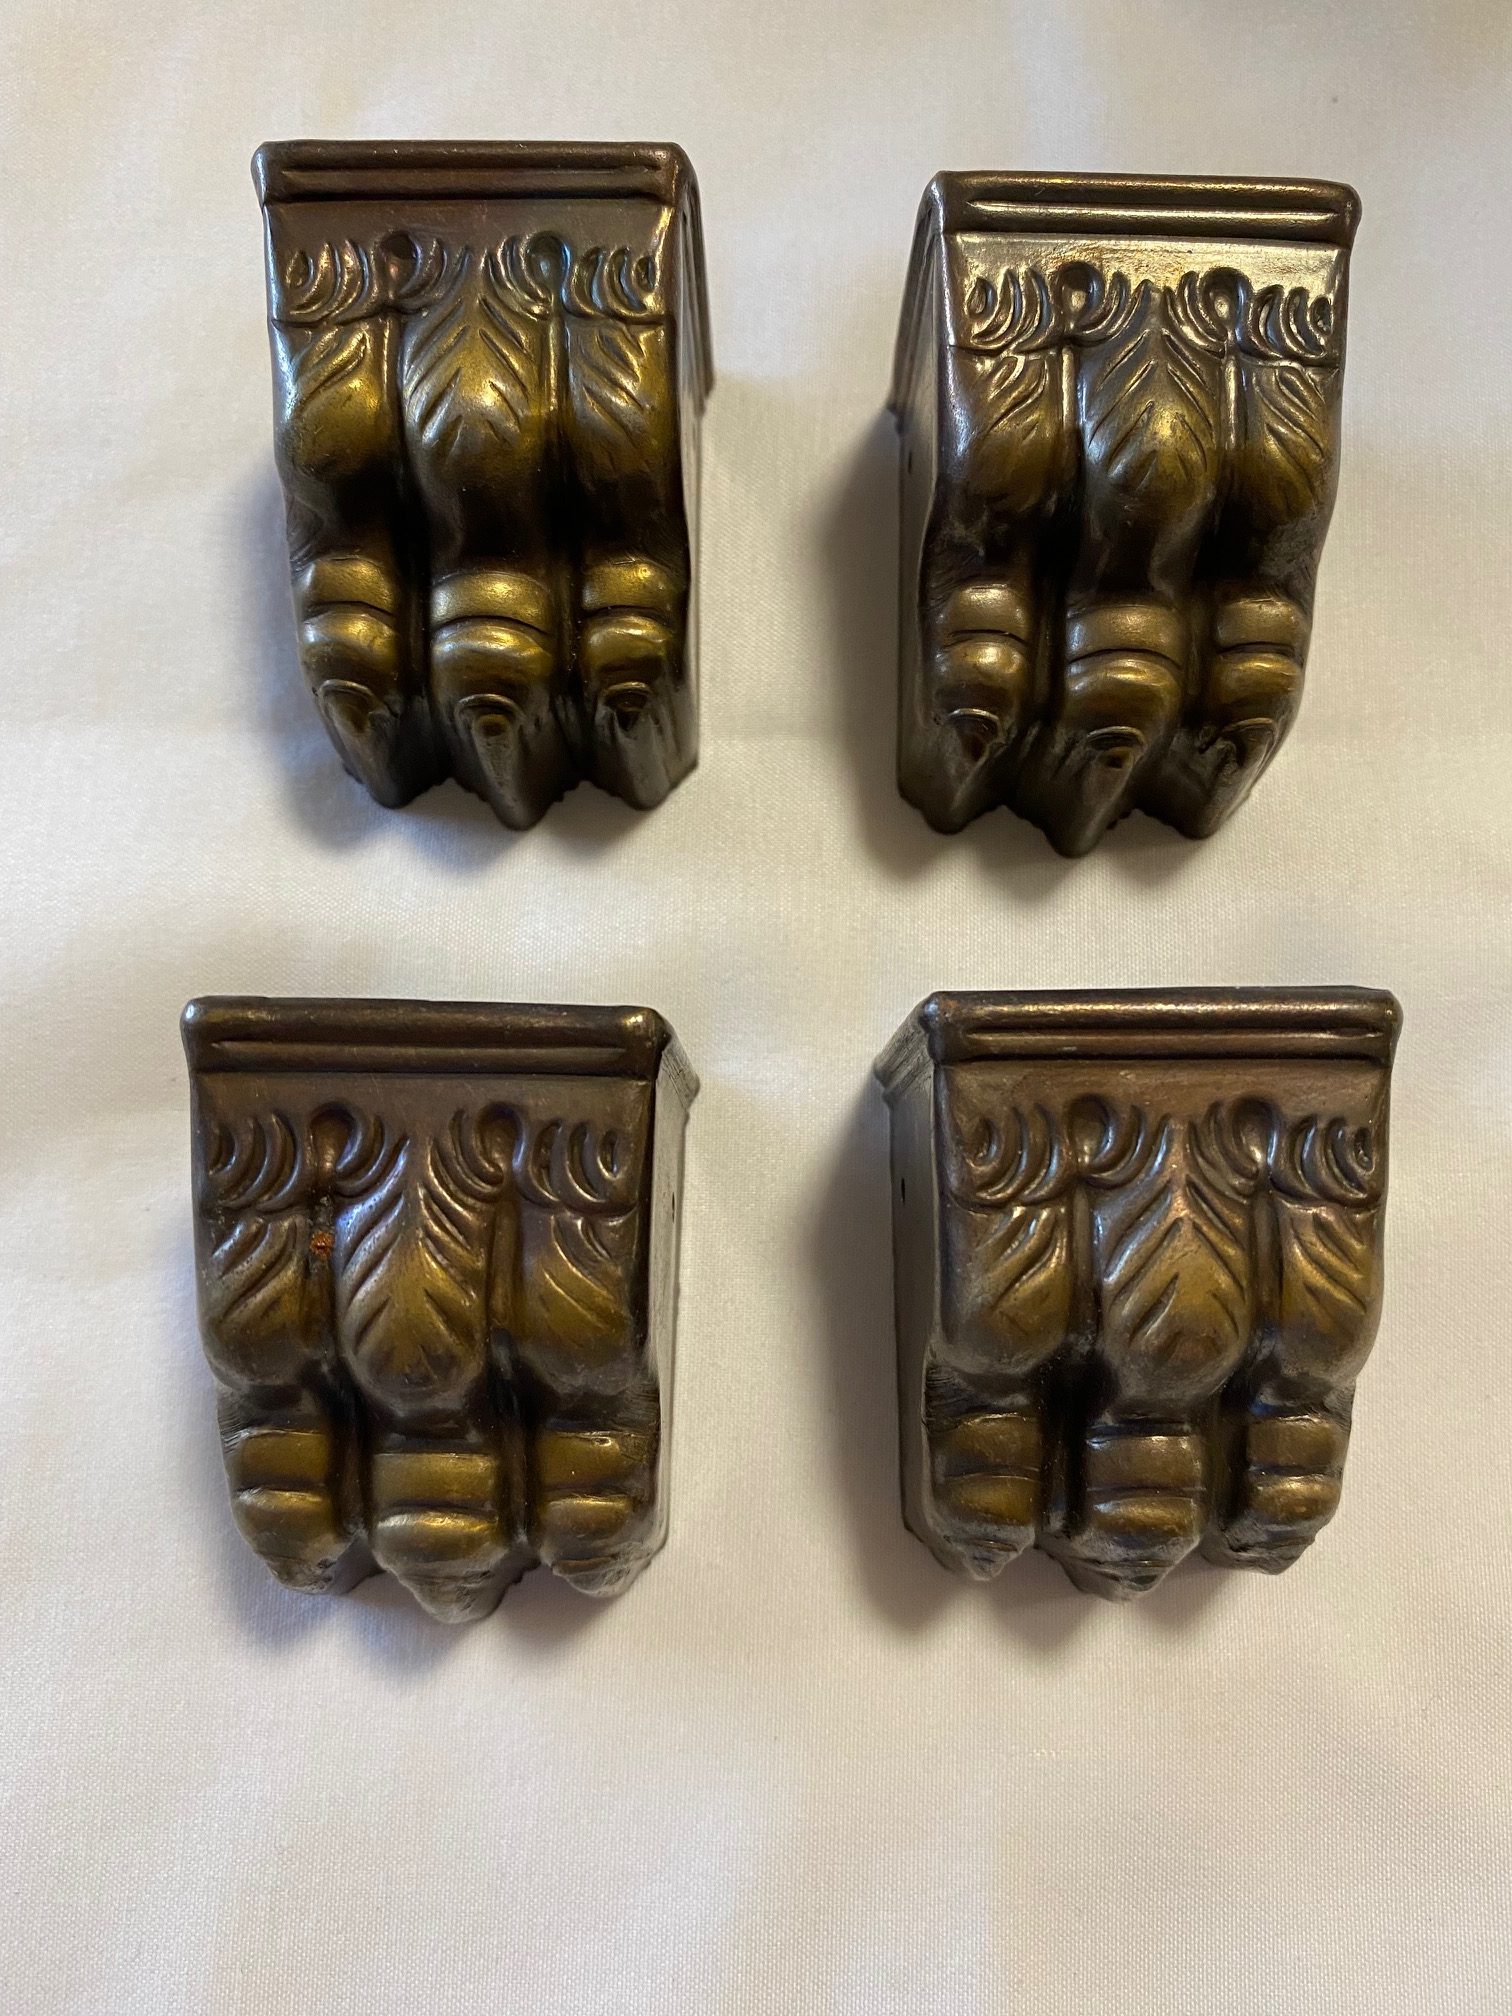 4 Used Duncan Phyfe Style Table Leg Paw Foot Caps